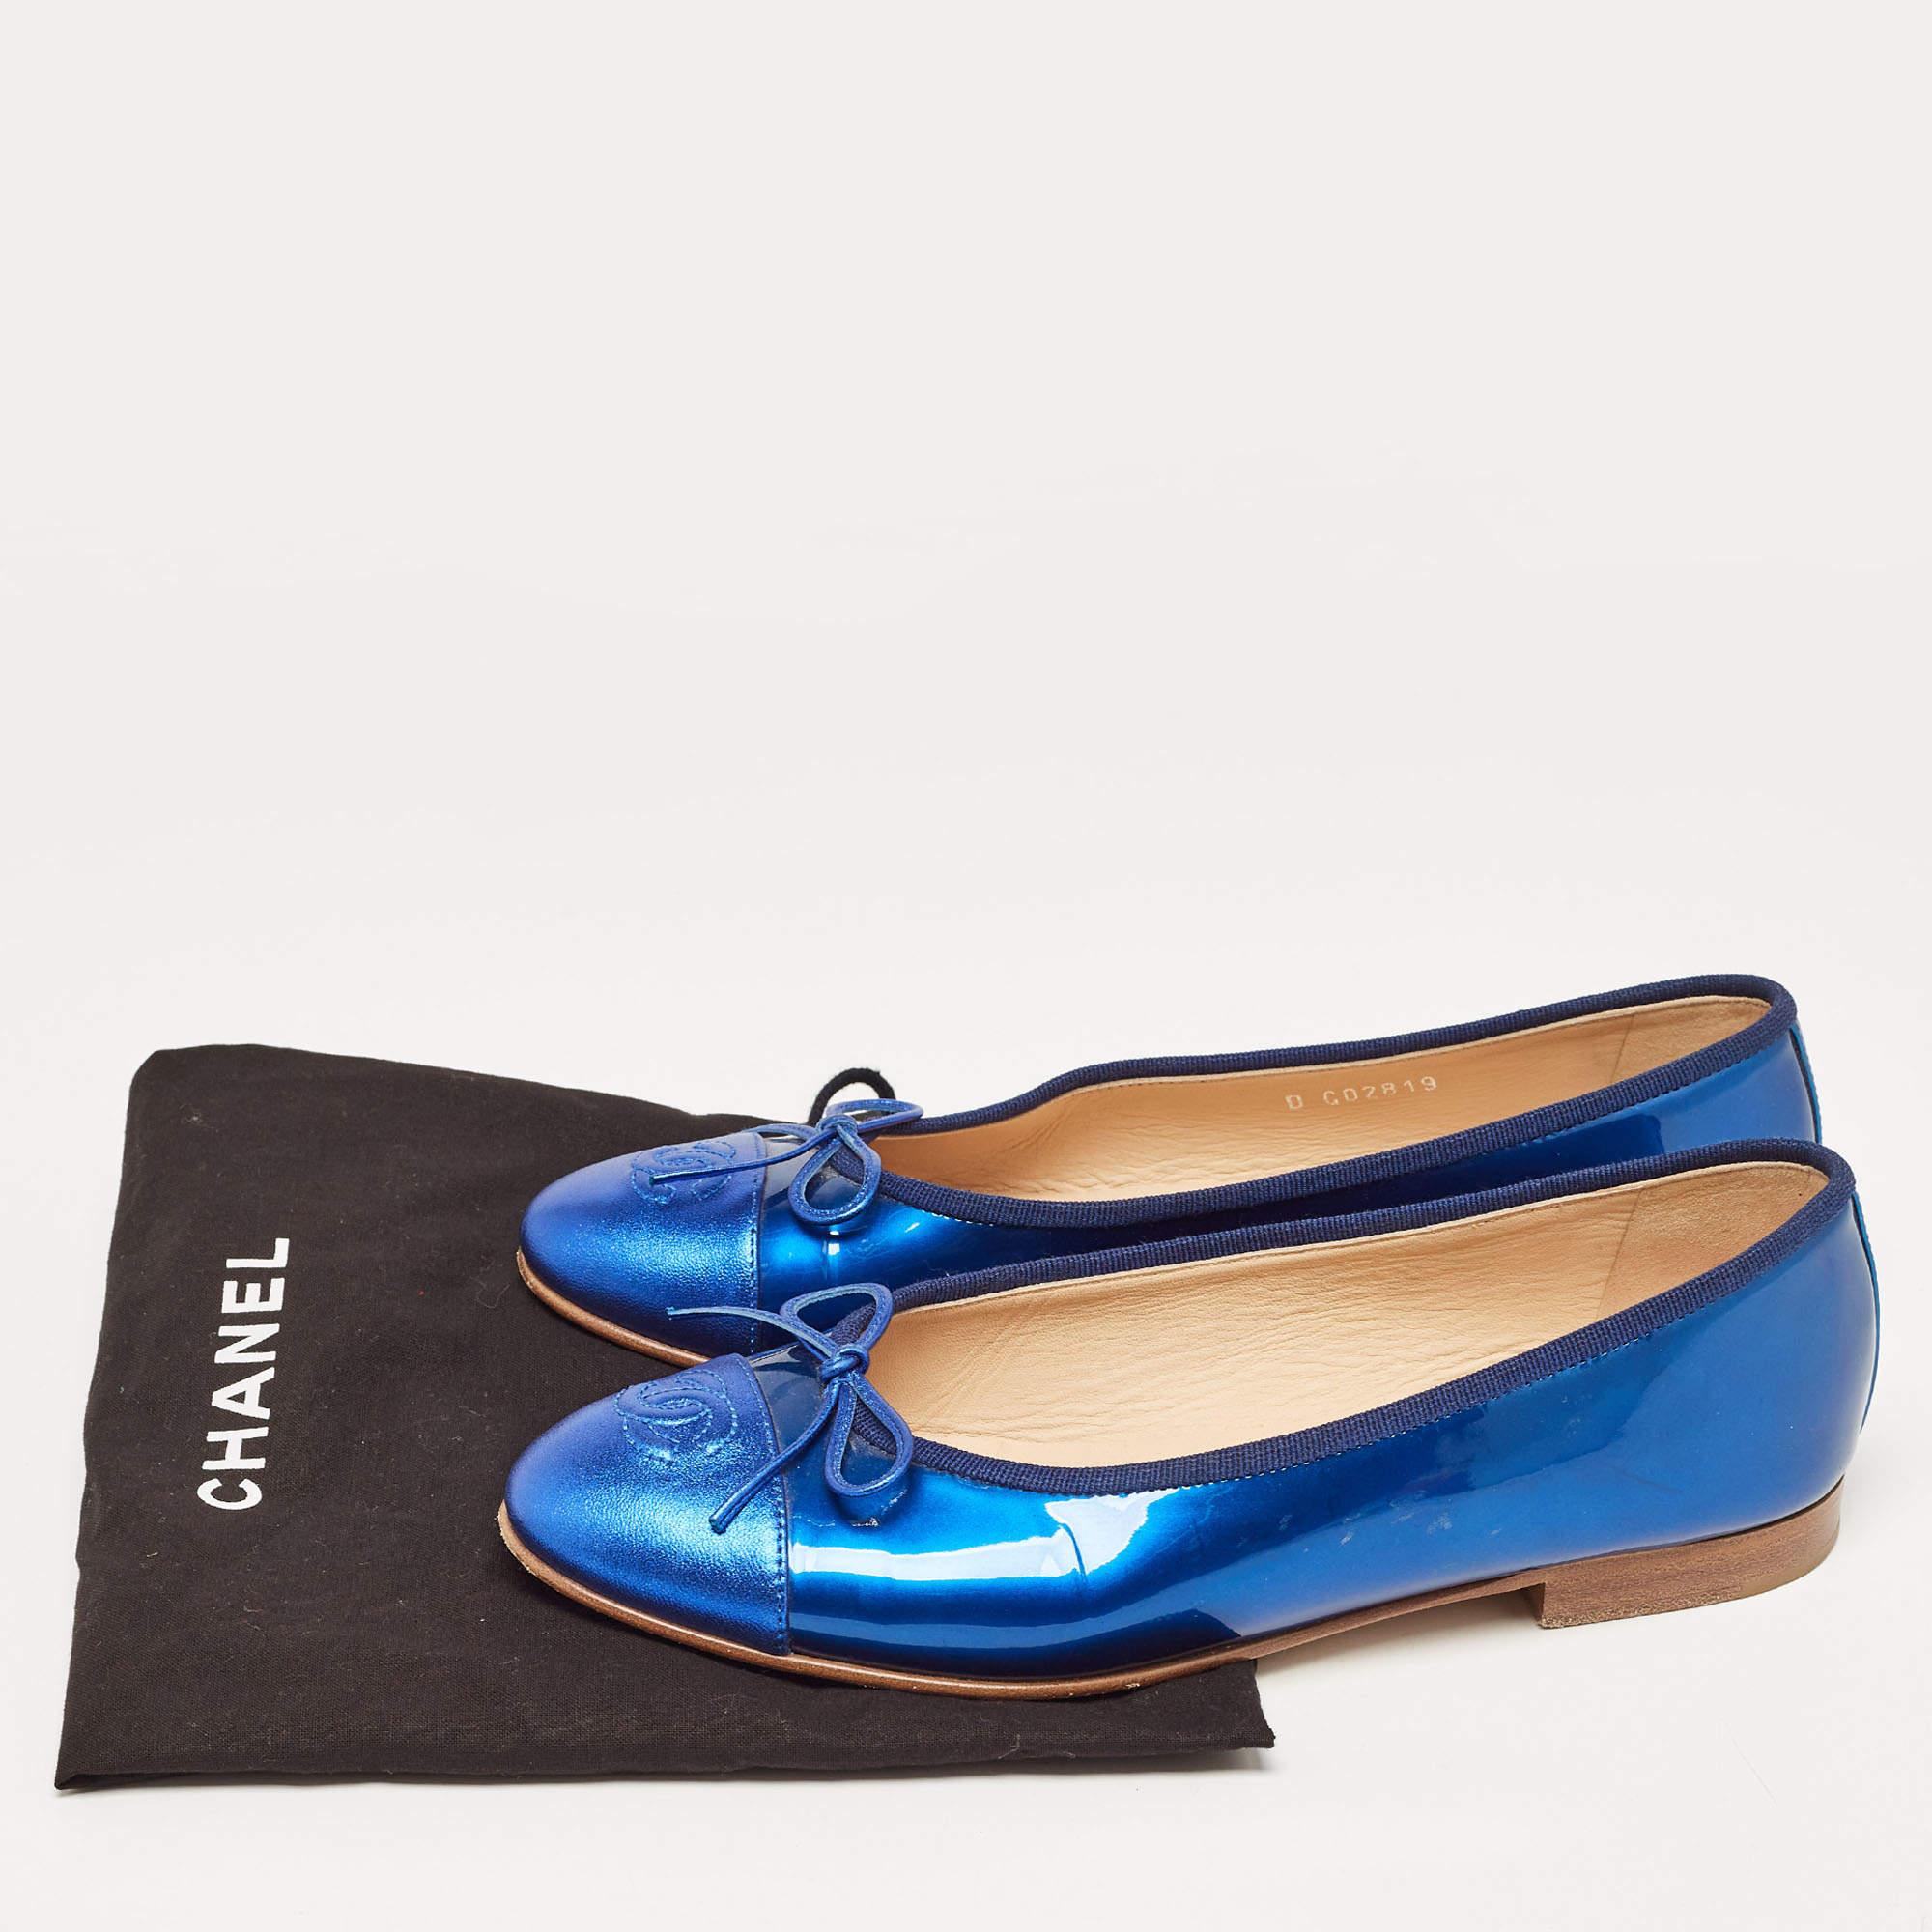 Chanel Blue Patent and Leather CC Cap Toe Bow Ballet Flats Size 38 For Sale 6